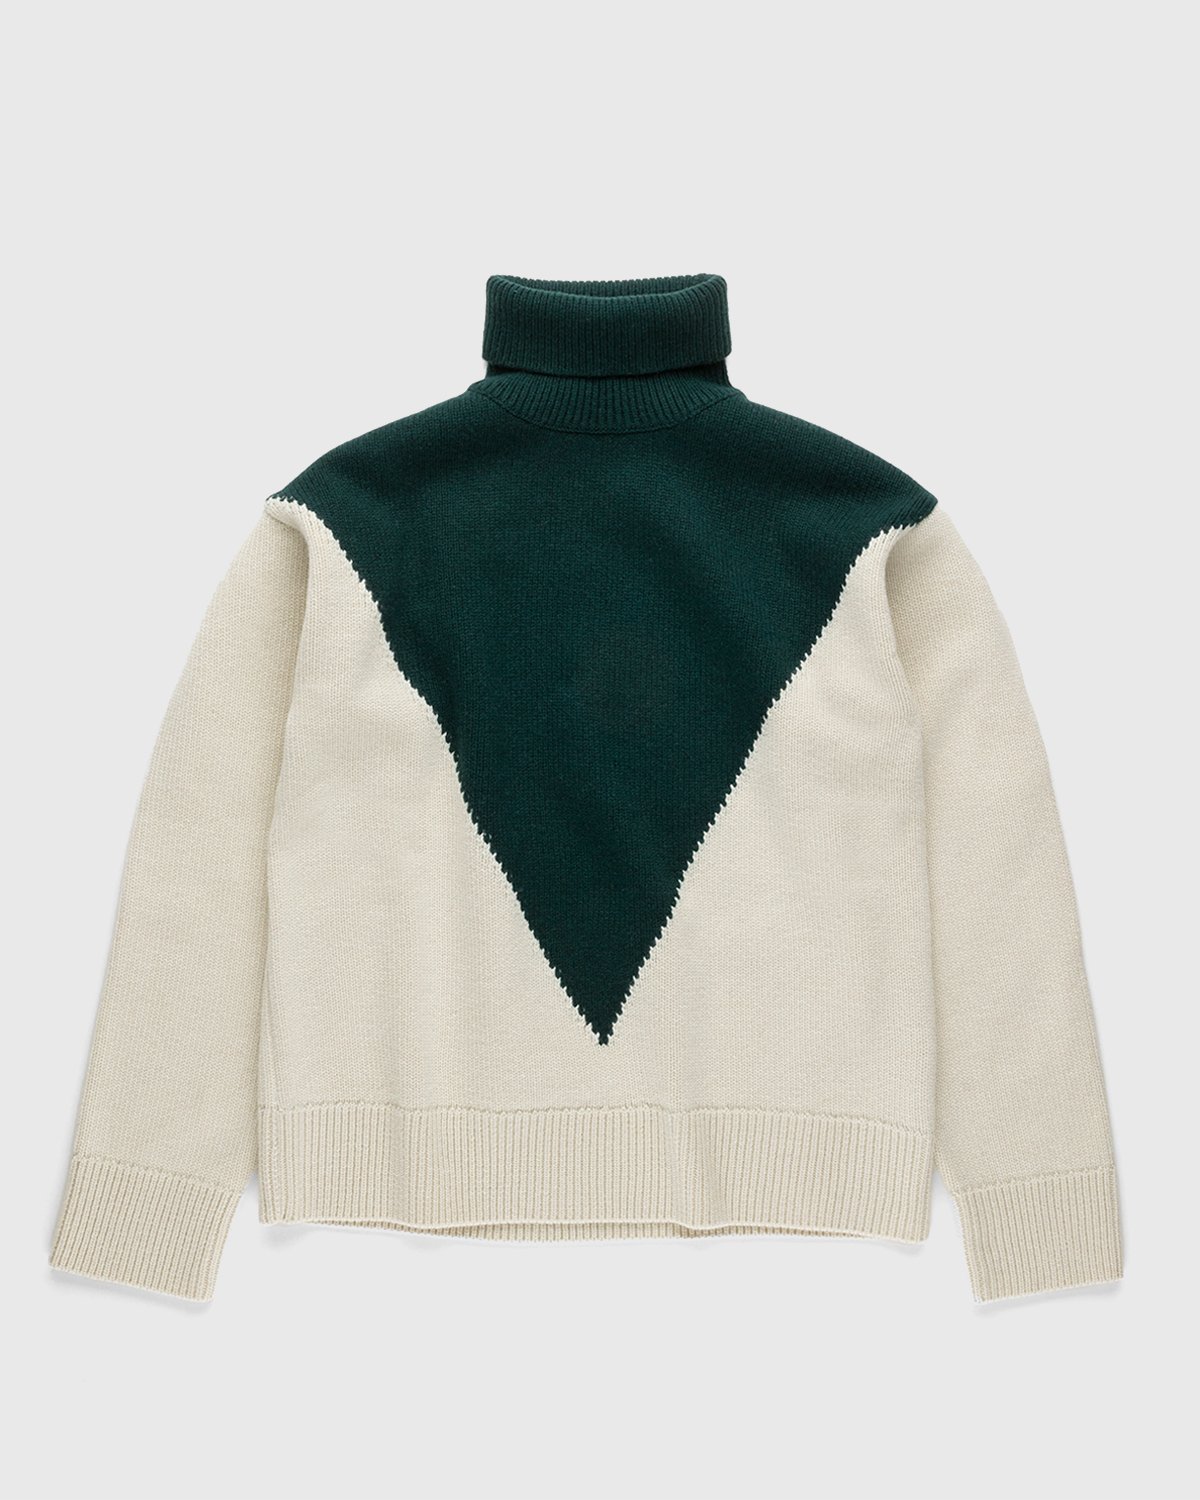 Jil Sander - Cashmere High Neck Knit Sweater Green - Clothing - Green - Image 1